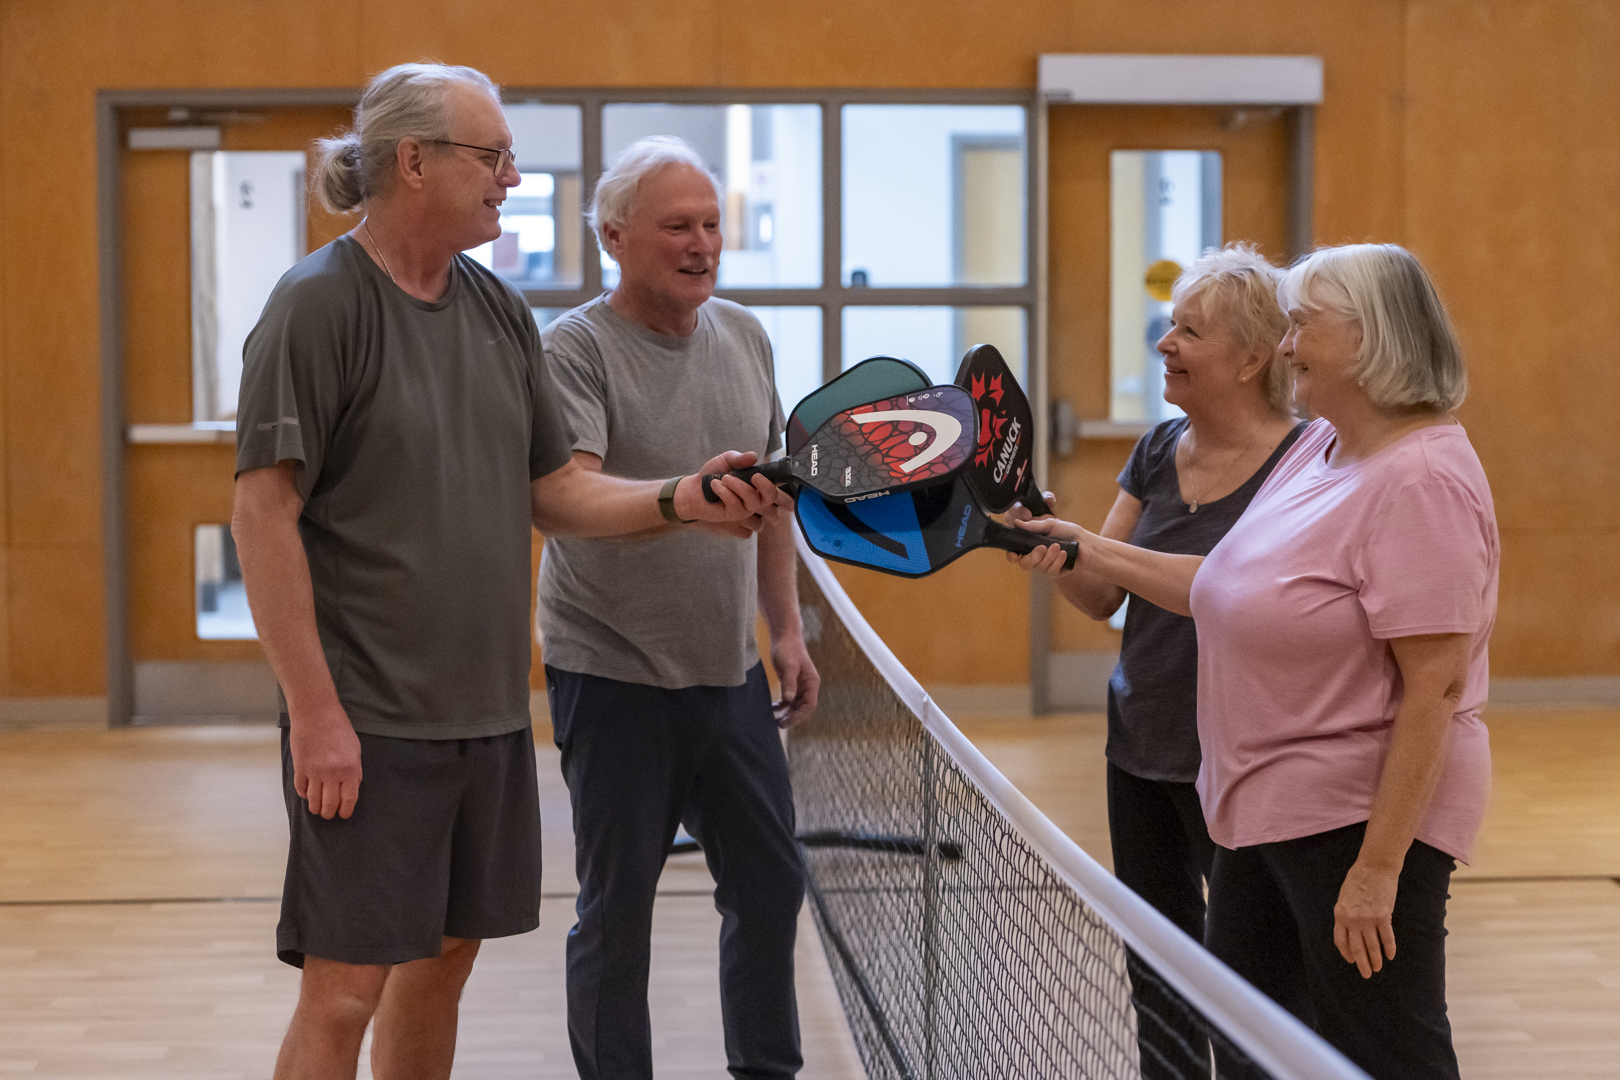 Four older adults playing pickelball